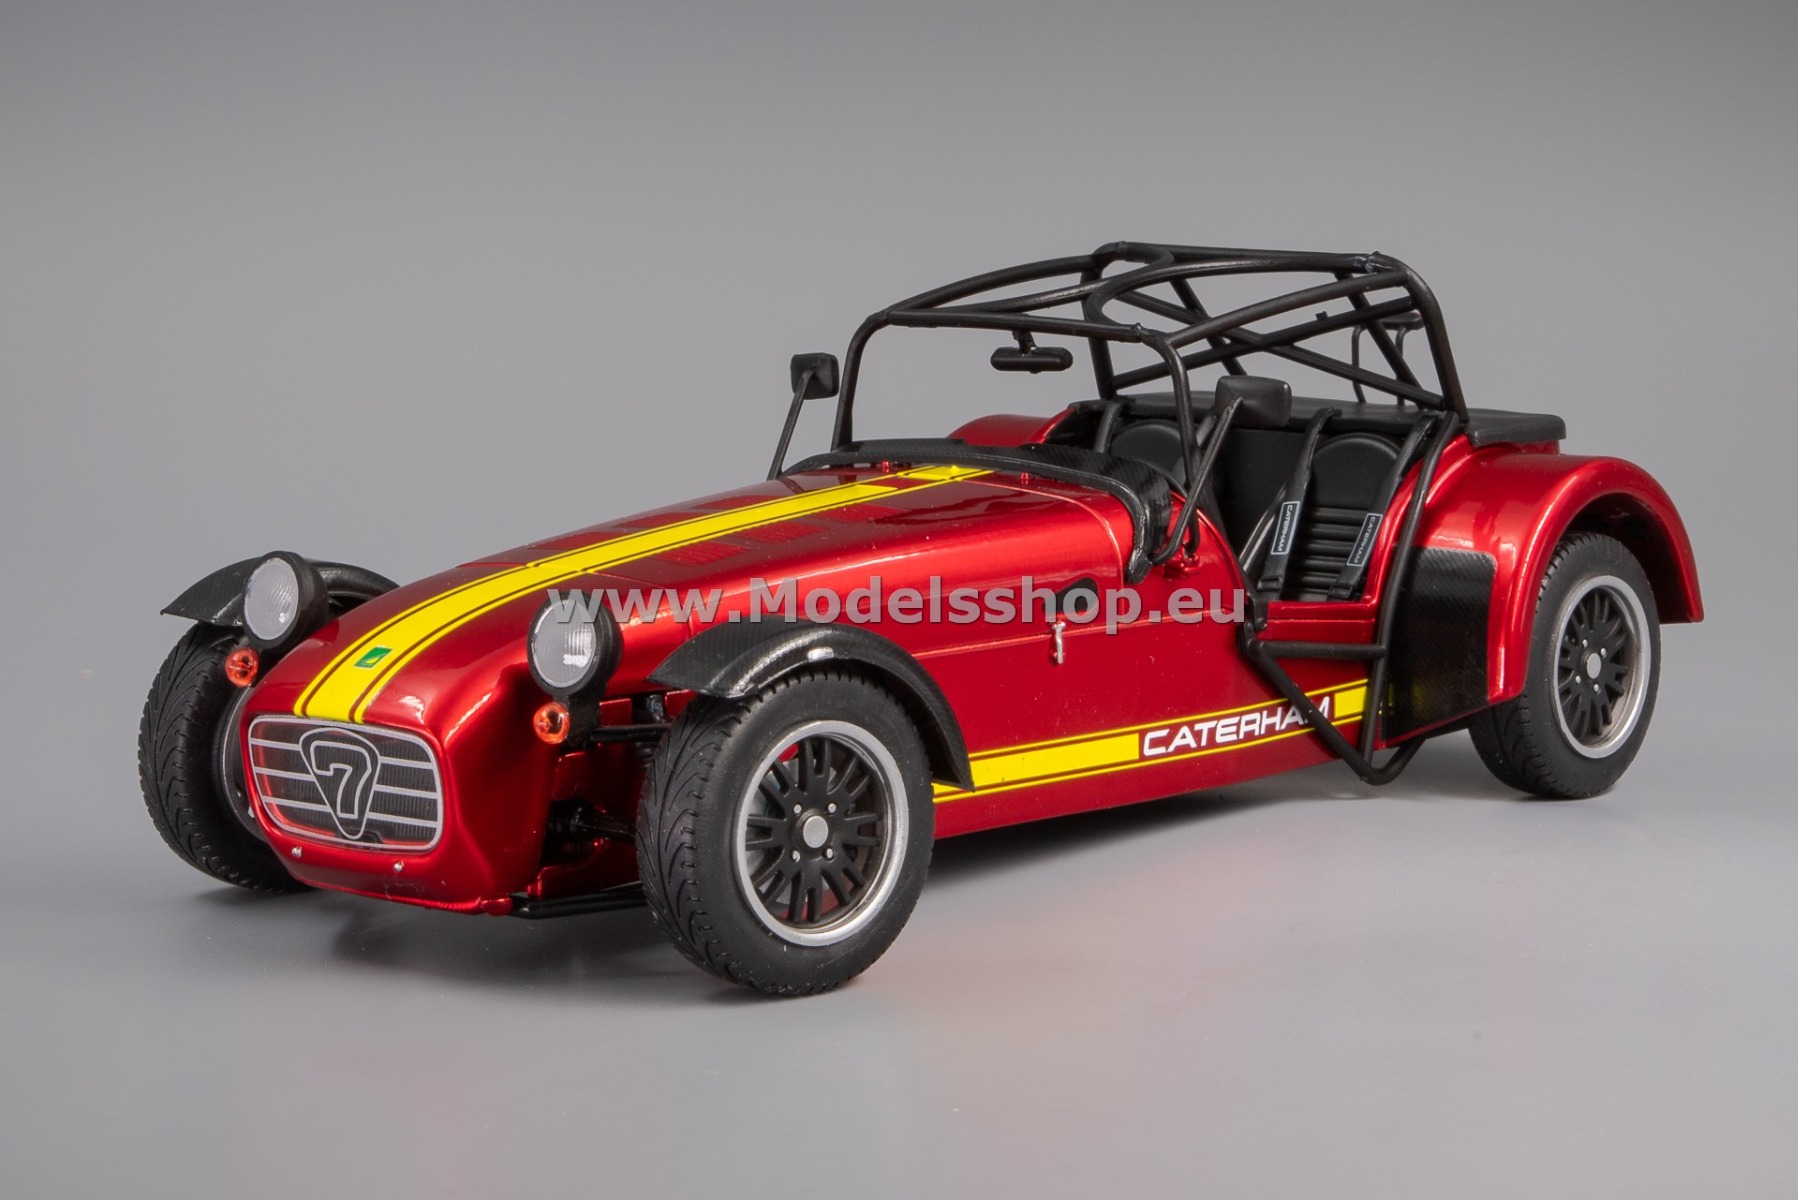 Solido S1801804 Caterham Seven 275, 2014 /academy red - yellow/